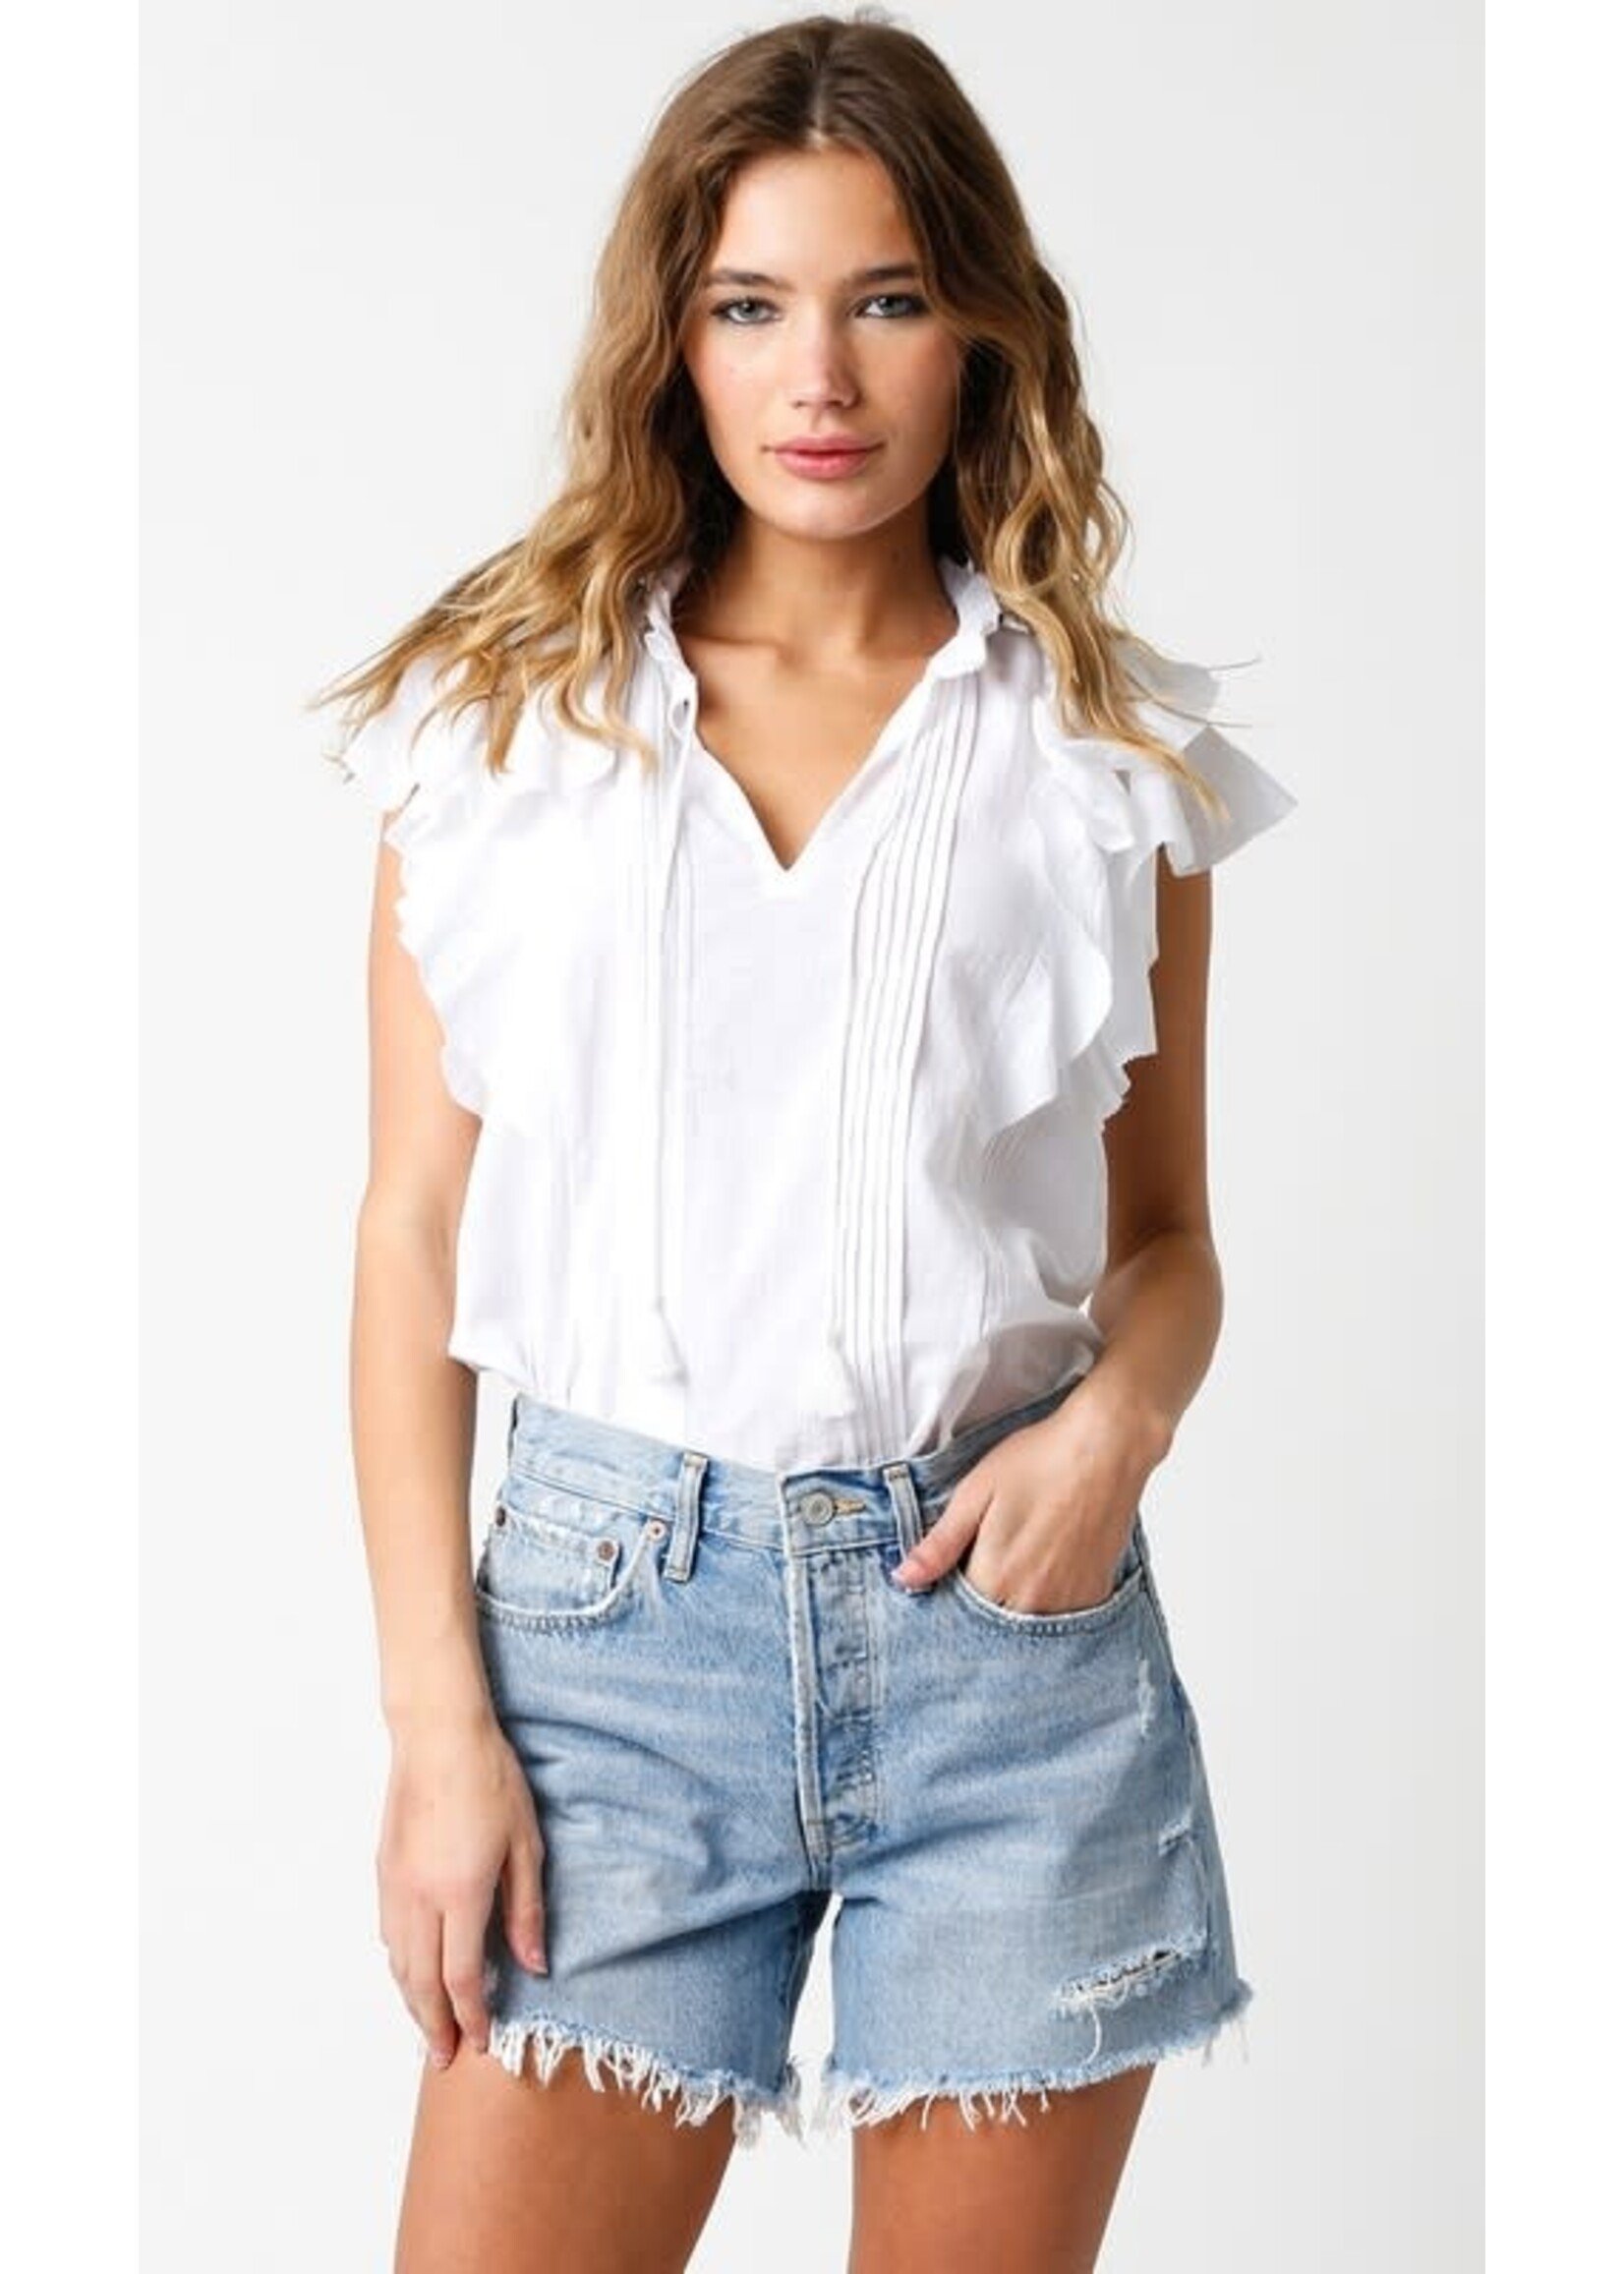 Olivaceous Olivaceous Janelle Ruffle Top